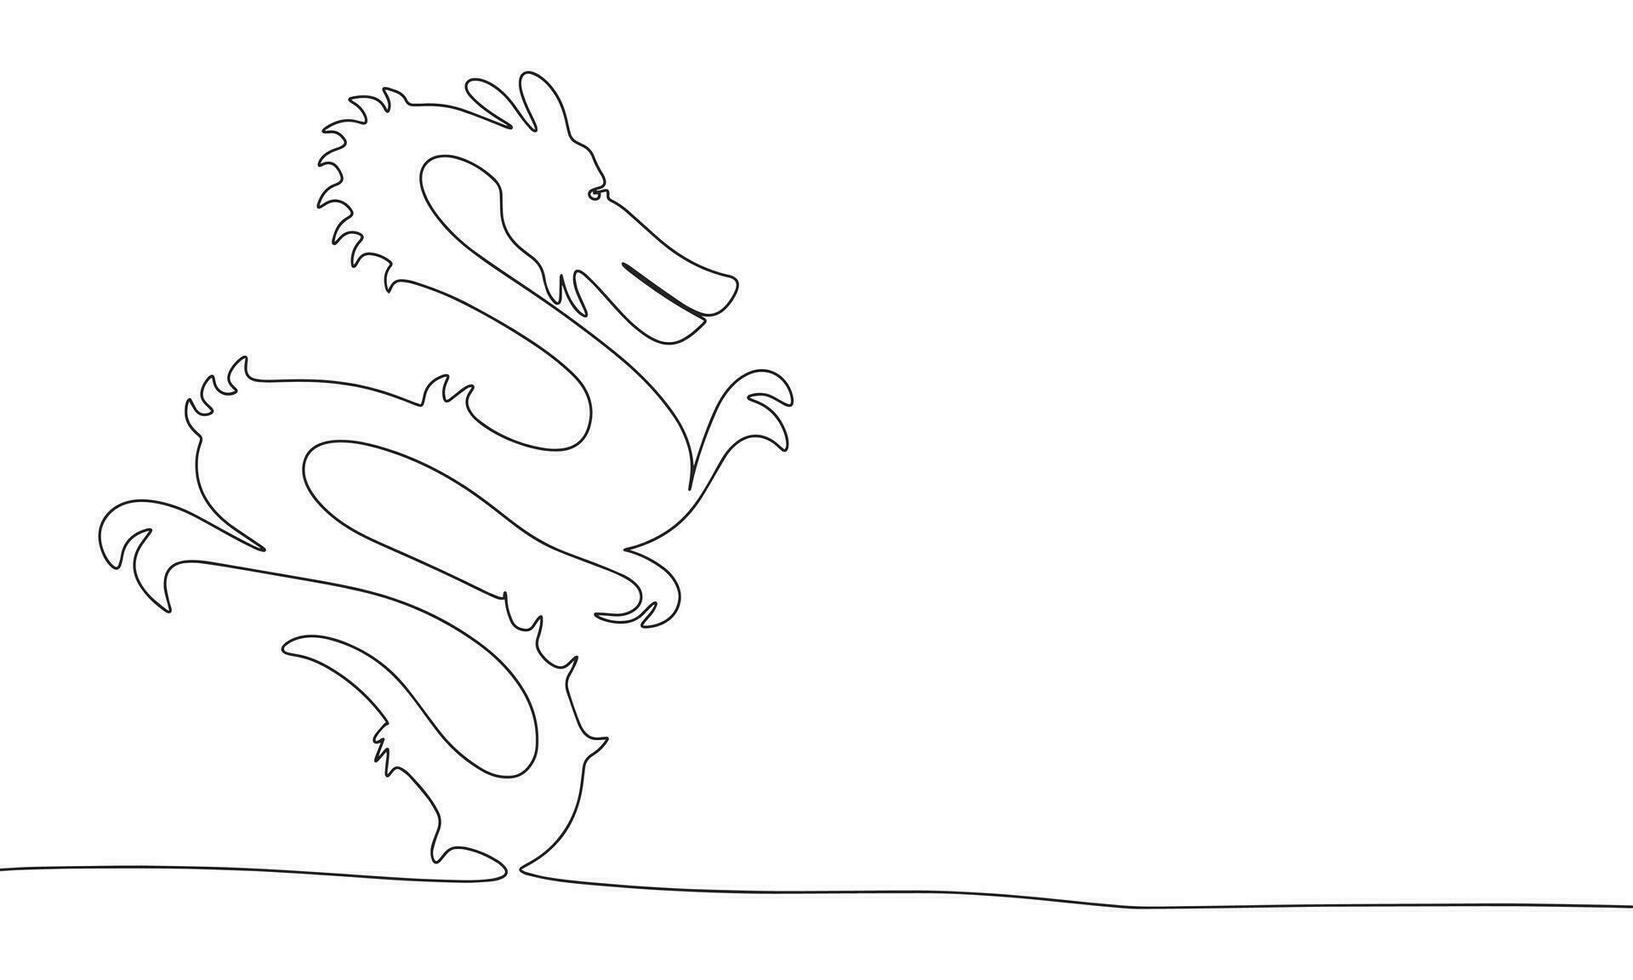 Symbol 2024 year continuous line drawing art. Abstract simple dragon. One line continuous outline isolated vector illustration.